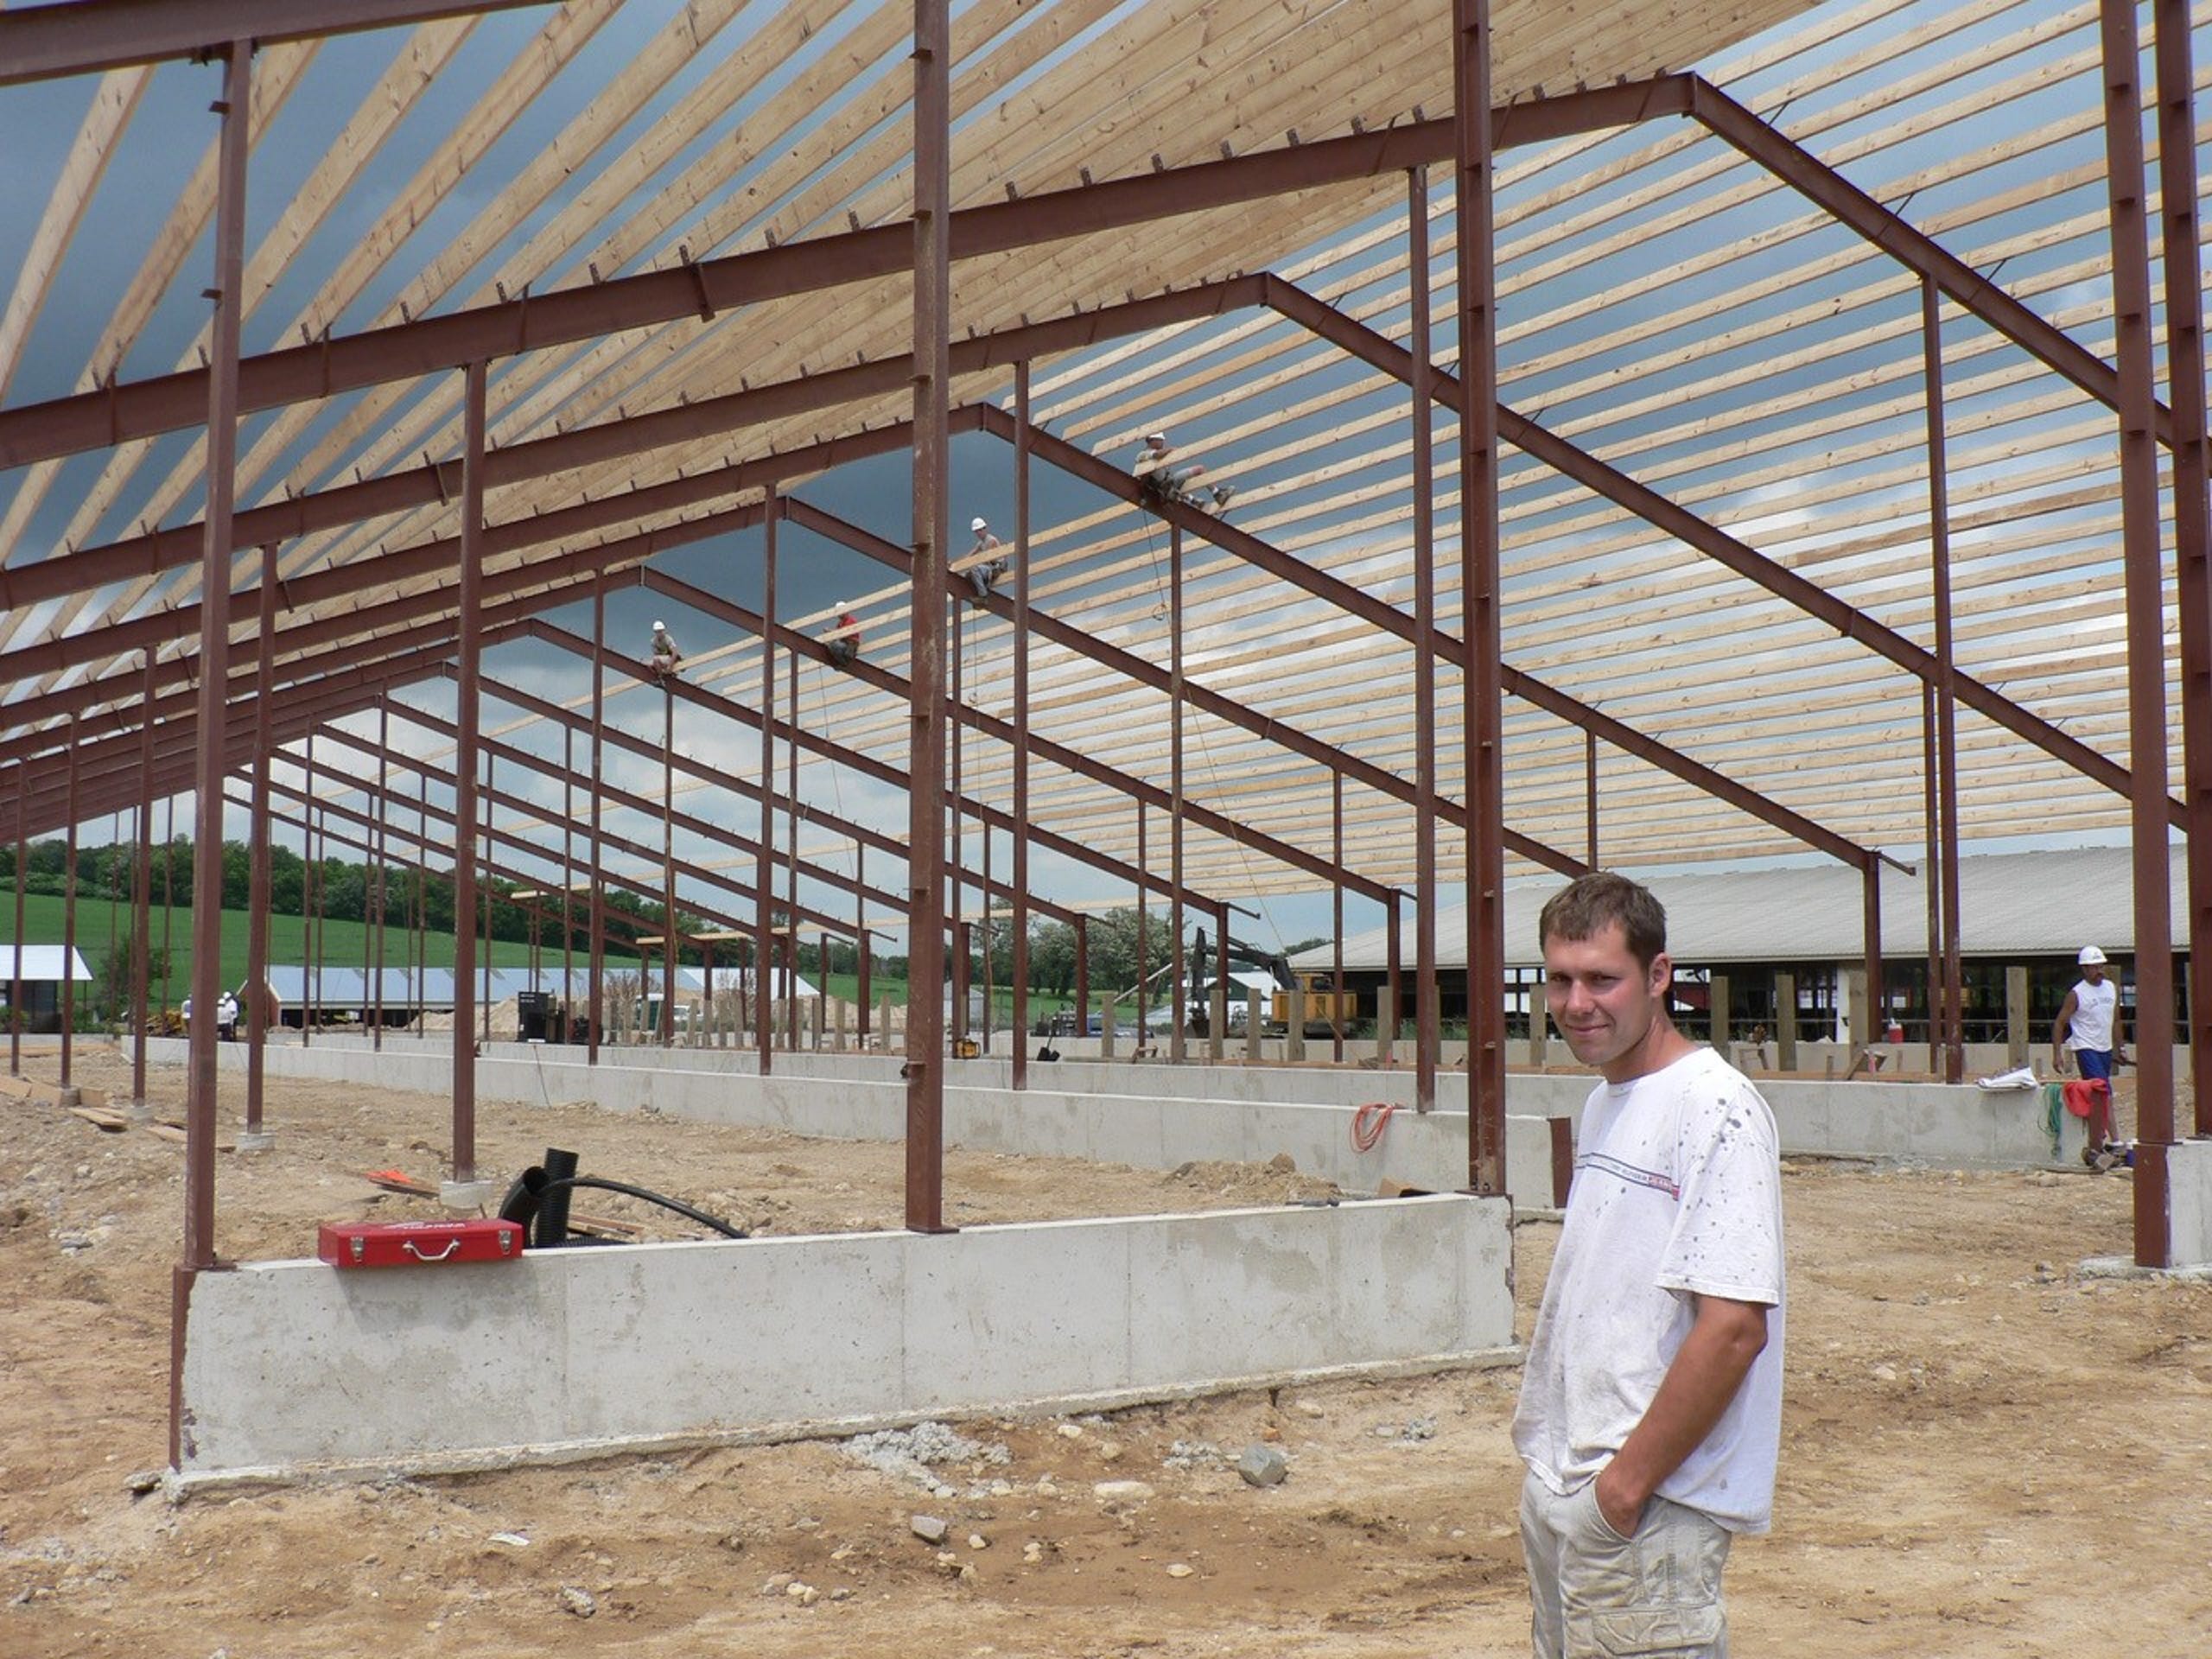 A new barn for more cows for a new generation.